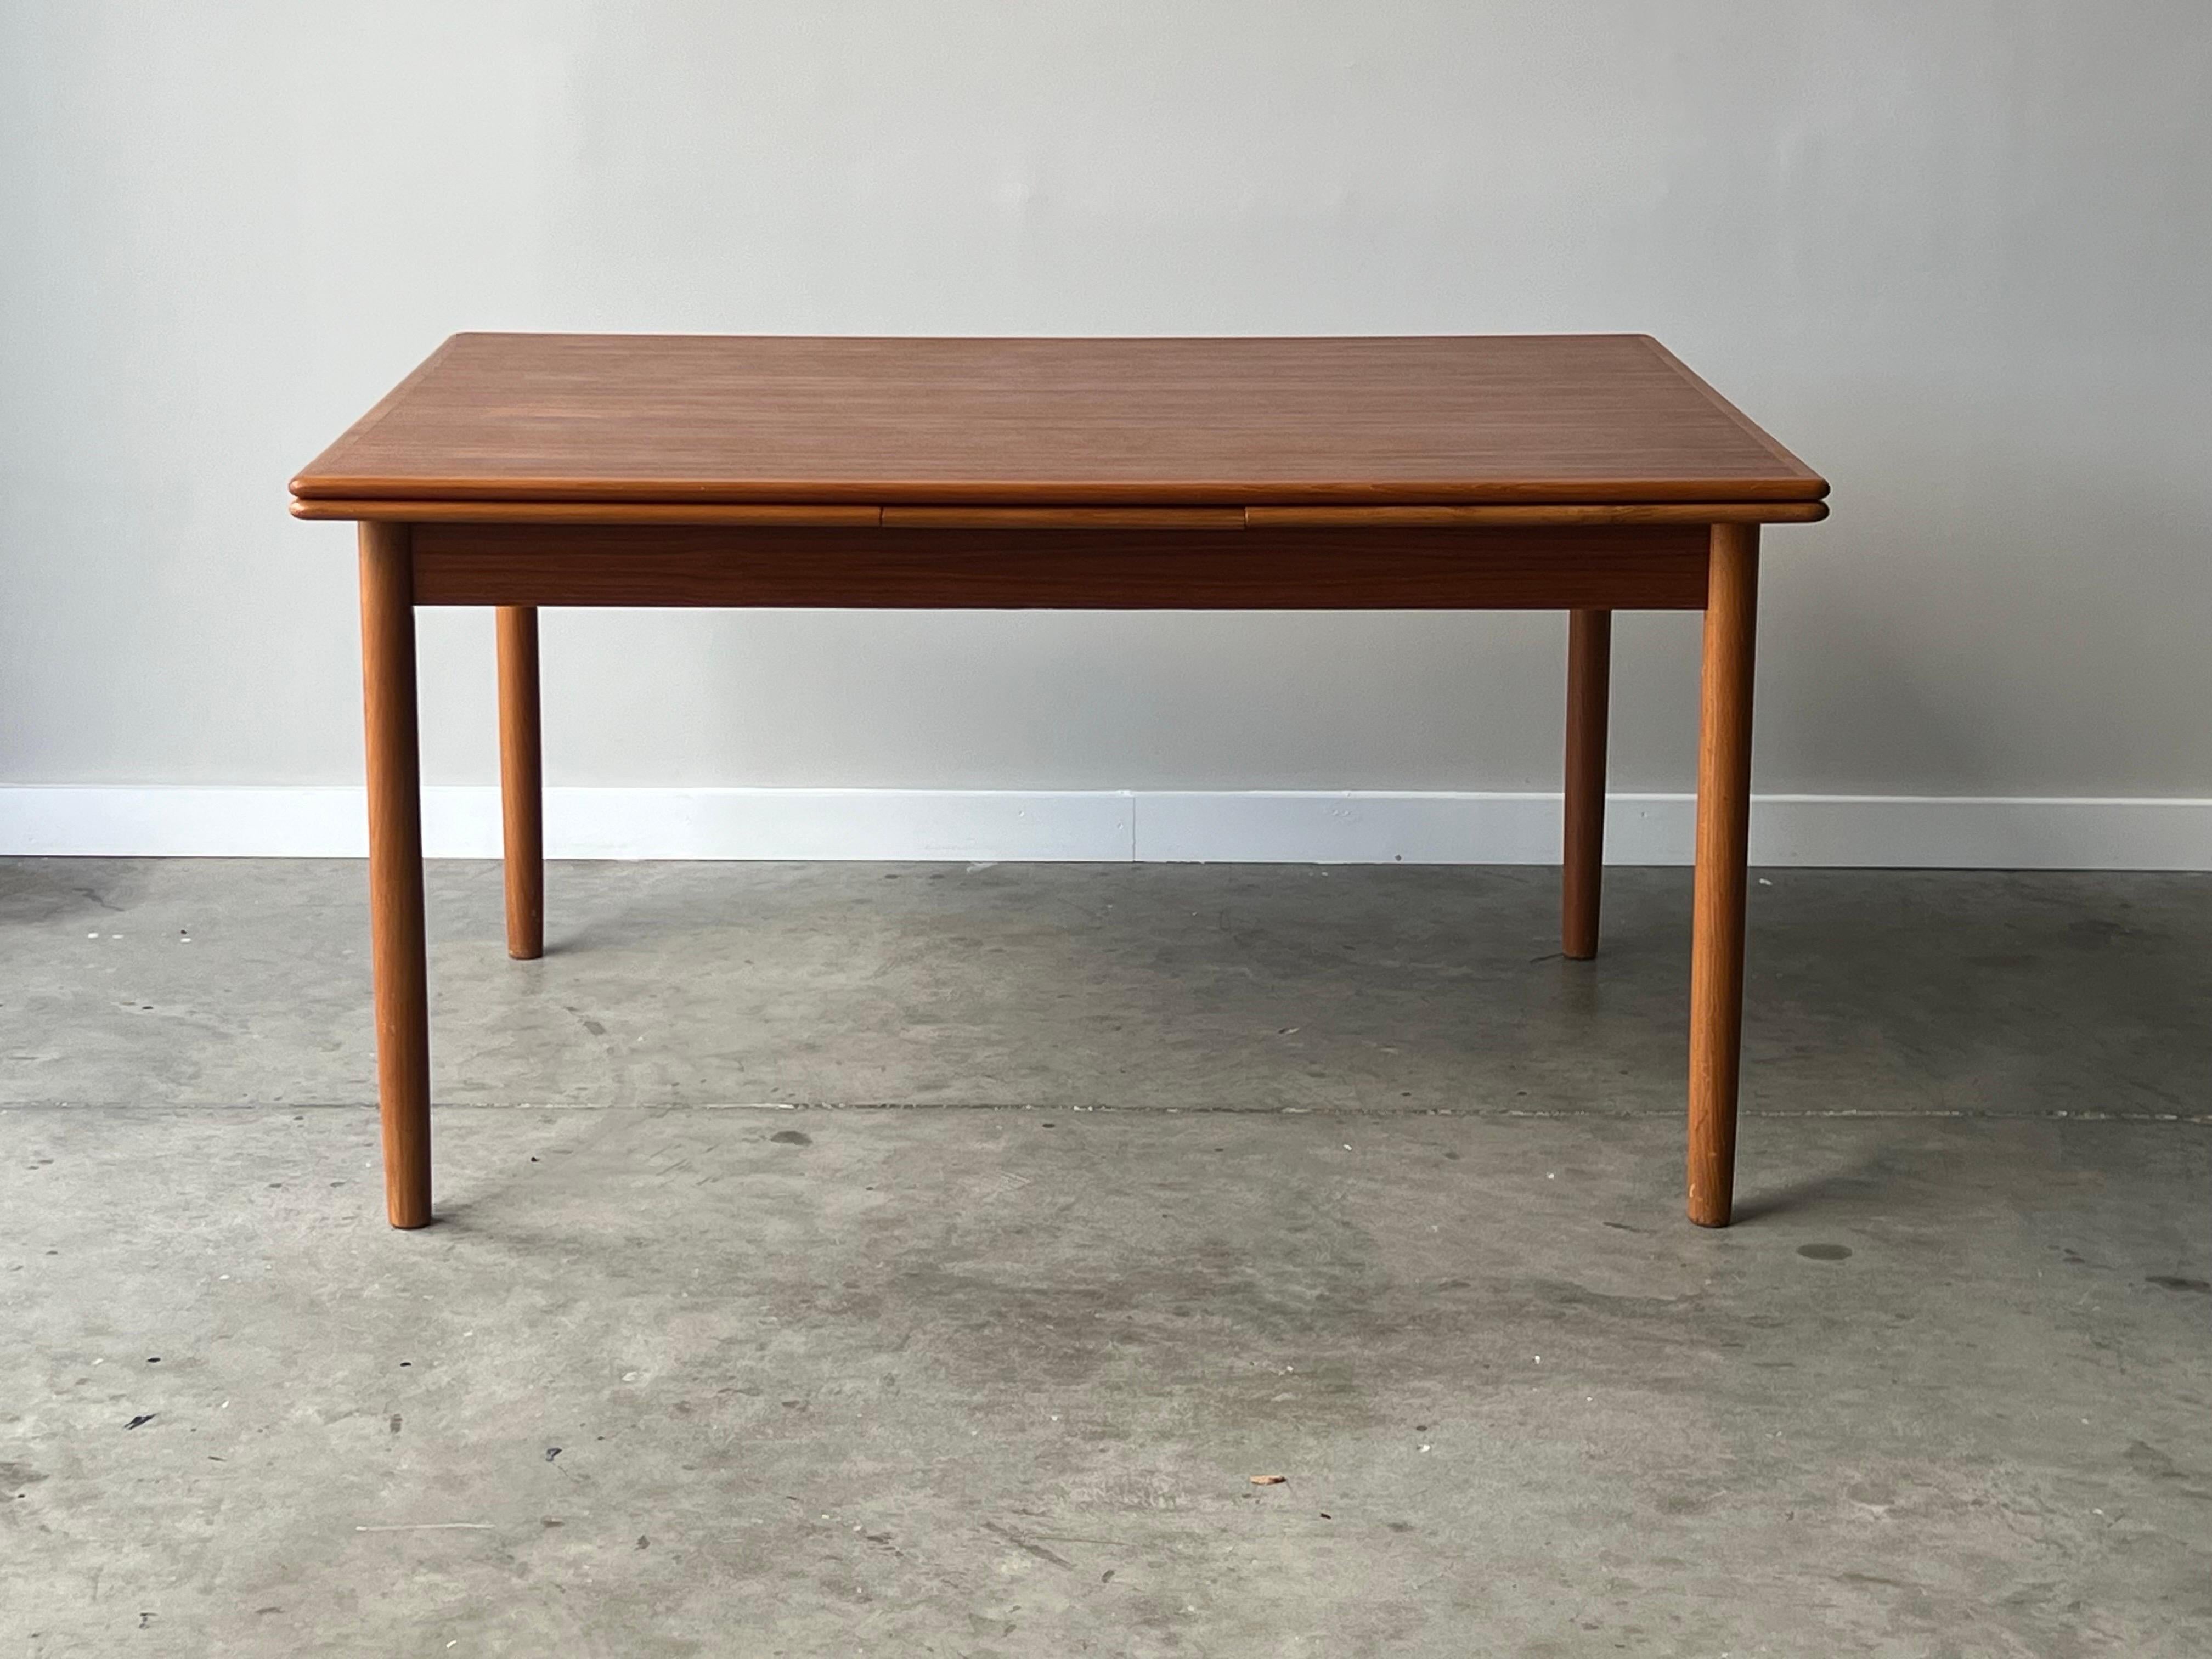 Beautiful expanding and hidden leaf danish teak dining table with gorgeous grain through out. This table expands almost double in size by releasing the leaves which slide underneath. Tapered teak legs present this table elegantly and is compatible